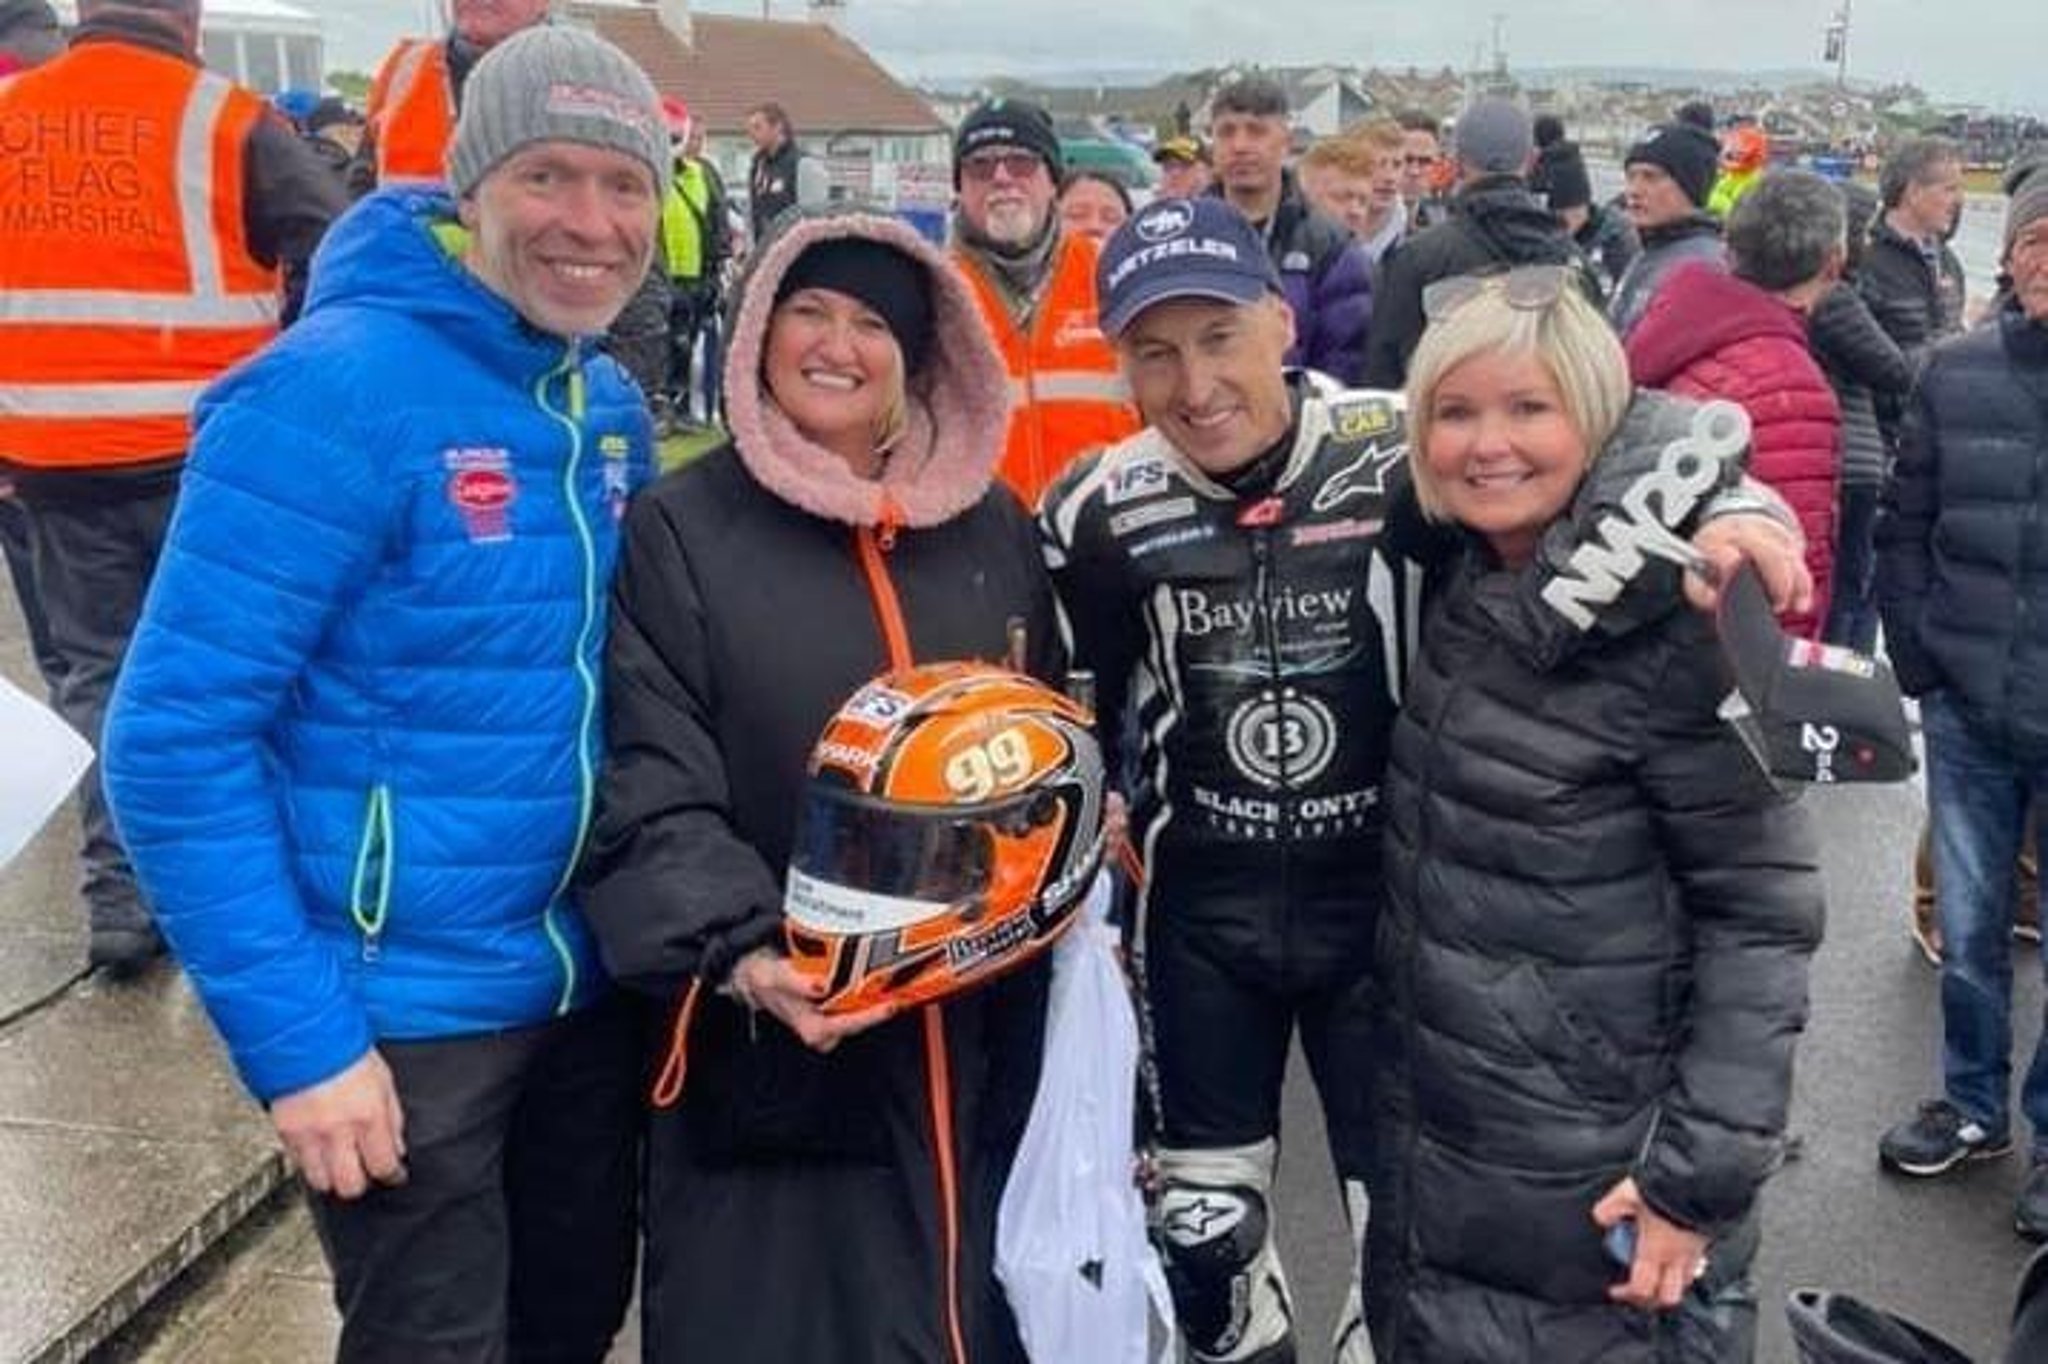 NW200: Jeremy McWilliams shows age is only a number with stunning Supersport rostrum for John Burrows&#8217; team